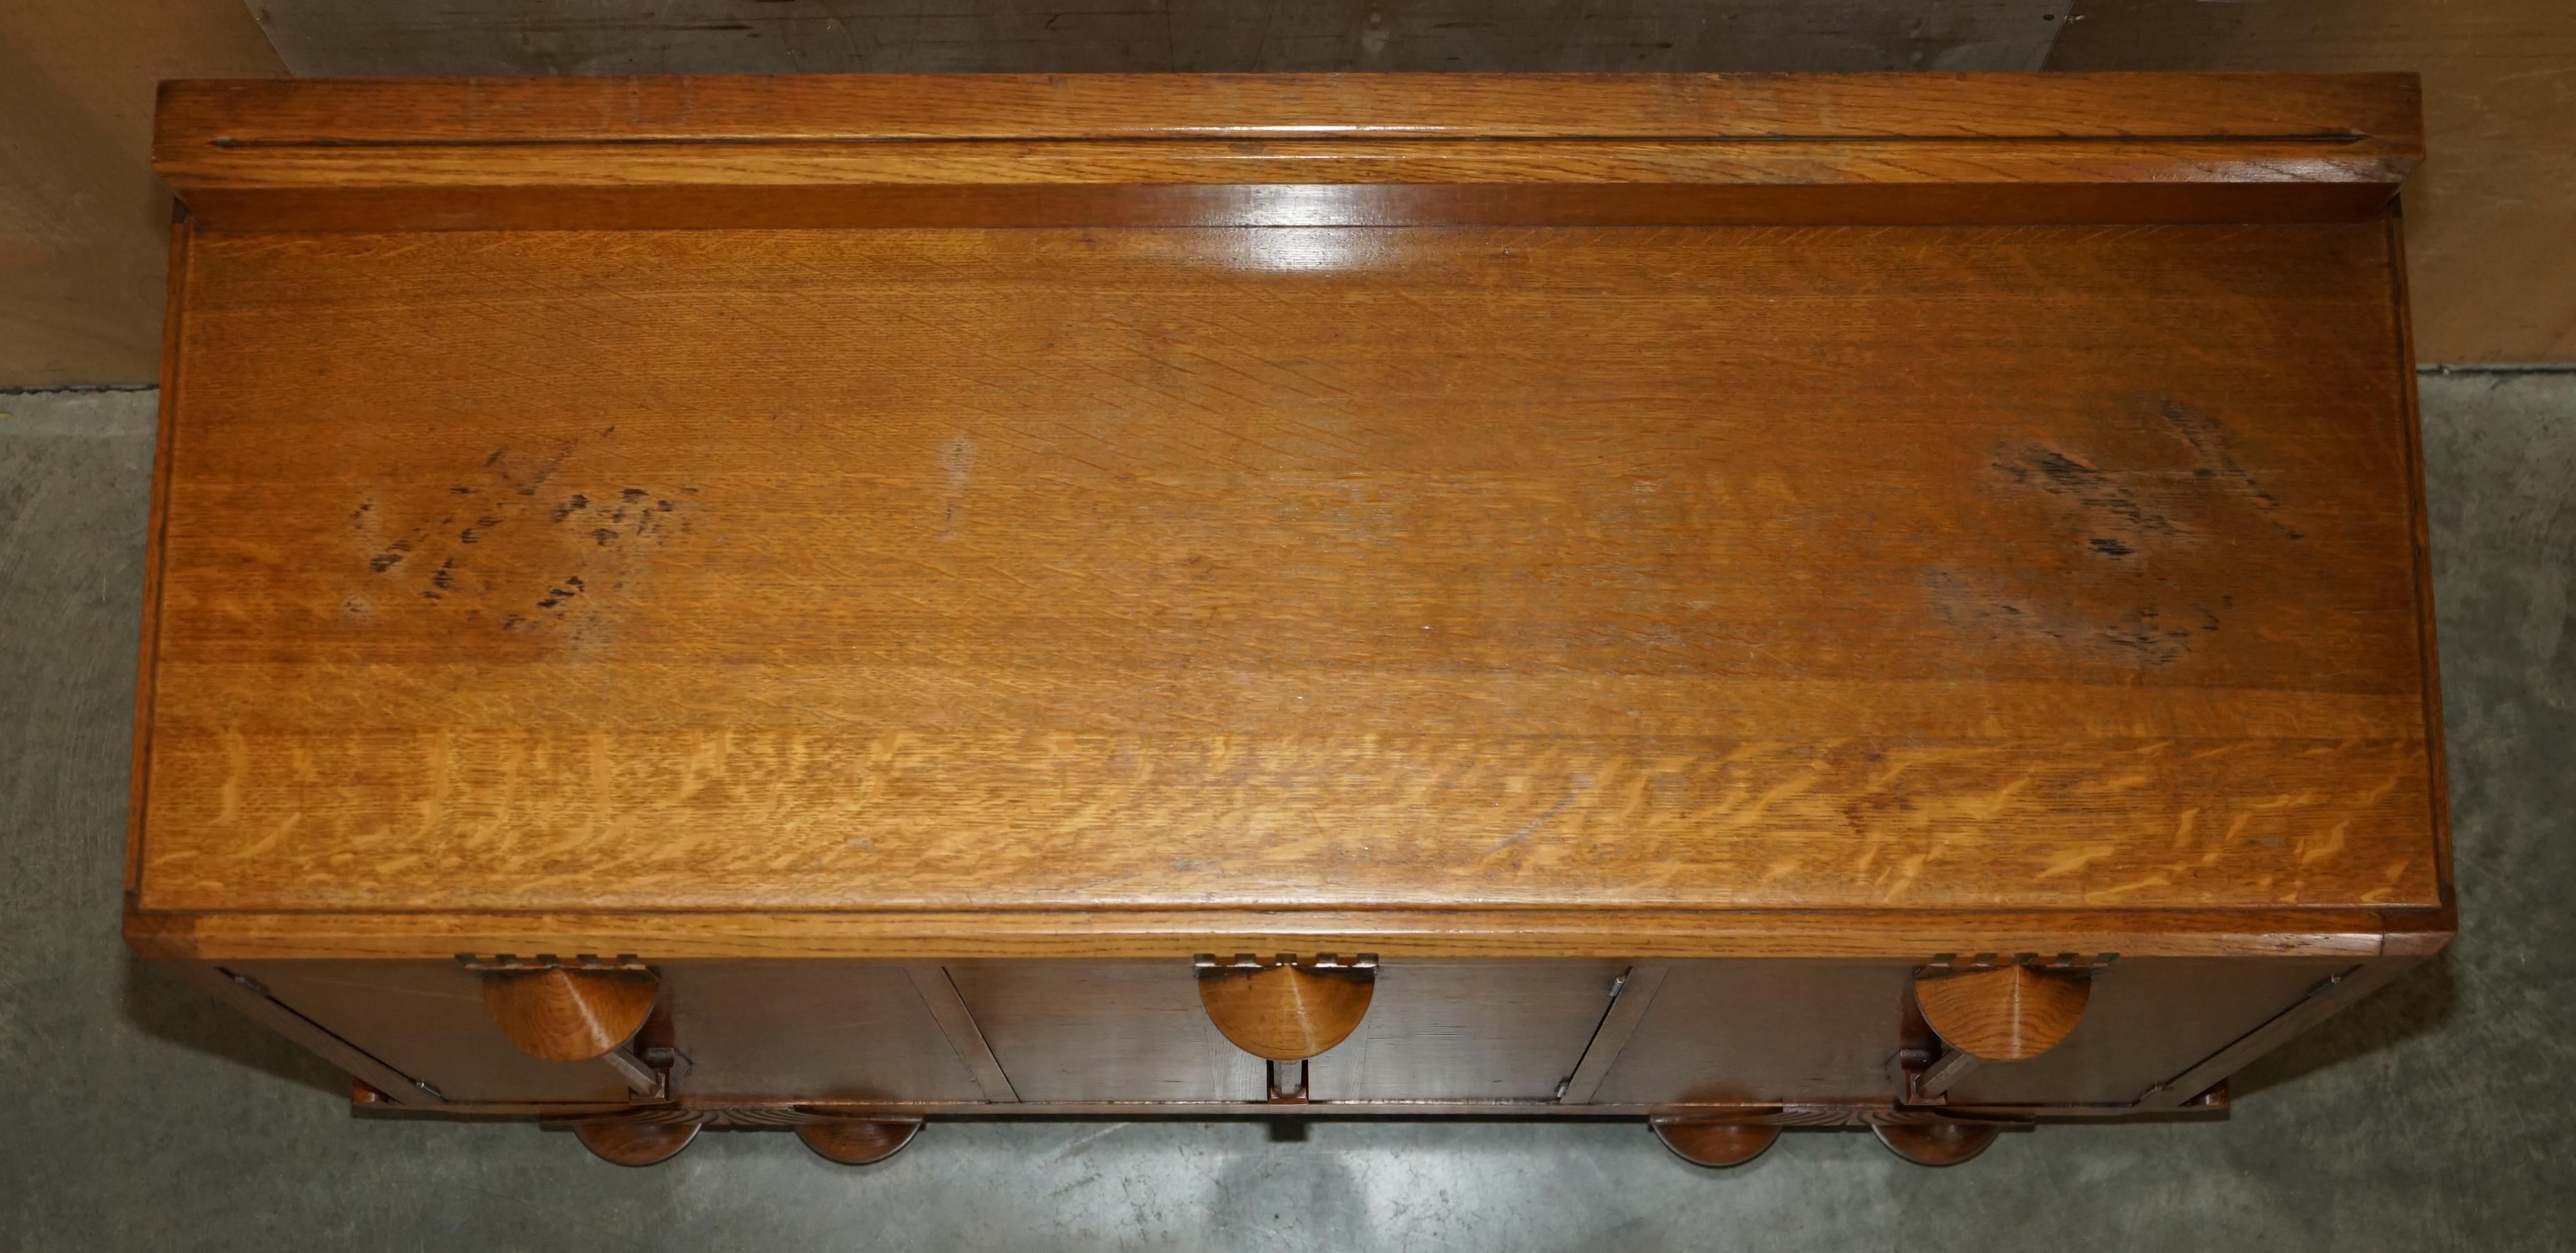 FINE LIBERTY'S COTSWOLD ART DECO OAK CARVED SiDEBOARD CIRCA 1920 PART OF A SUITE im Angebot 5